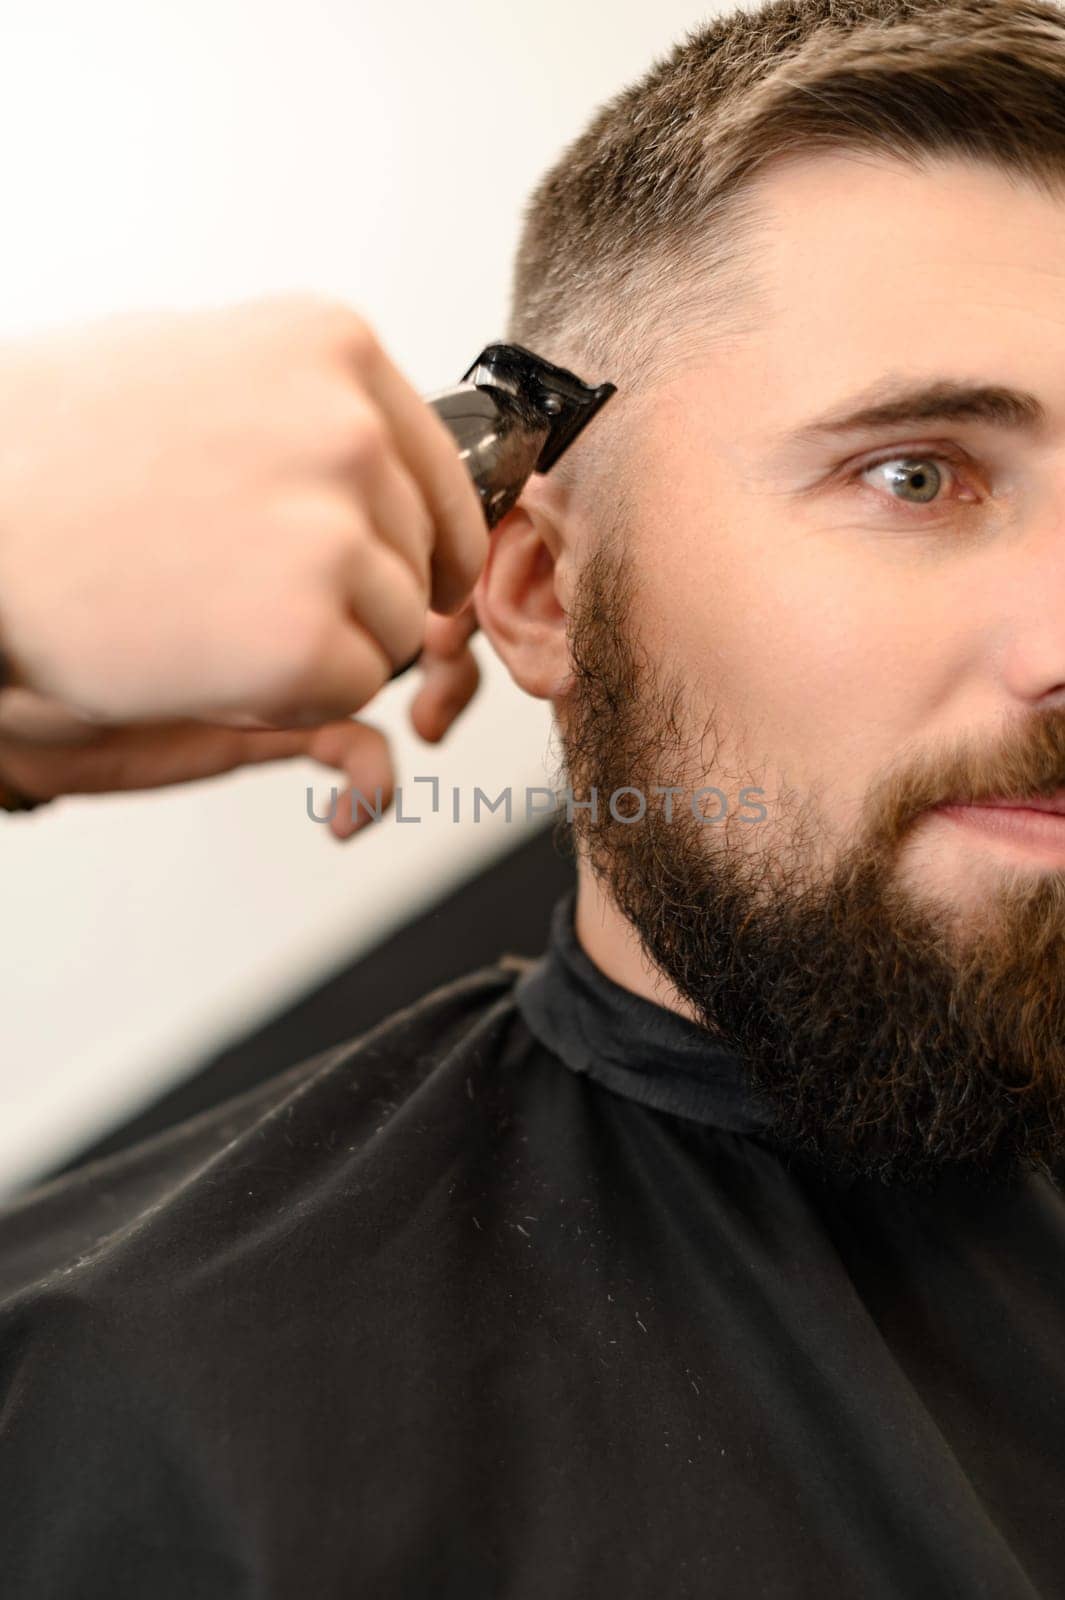 Barber shaves the contour of the oval line with a clipper on the client head. A man with a beard gets a haircut in a barbershop chair. by Niko_Cingaryuk